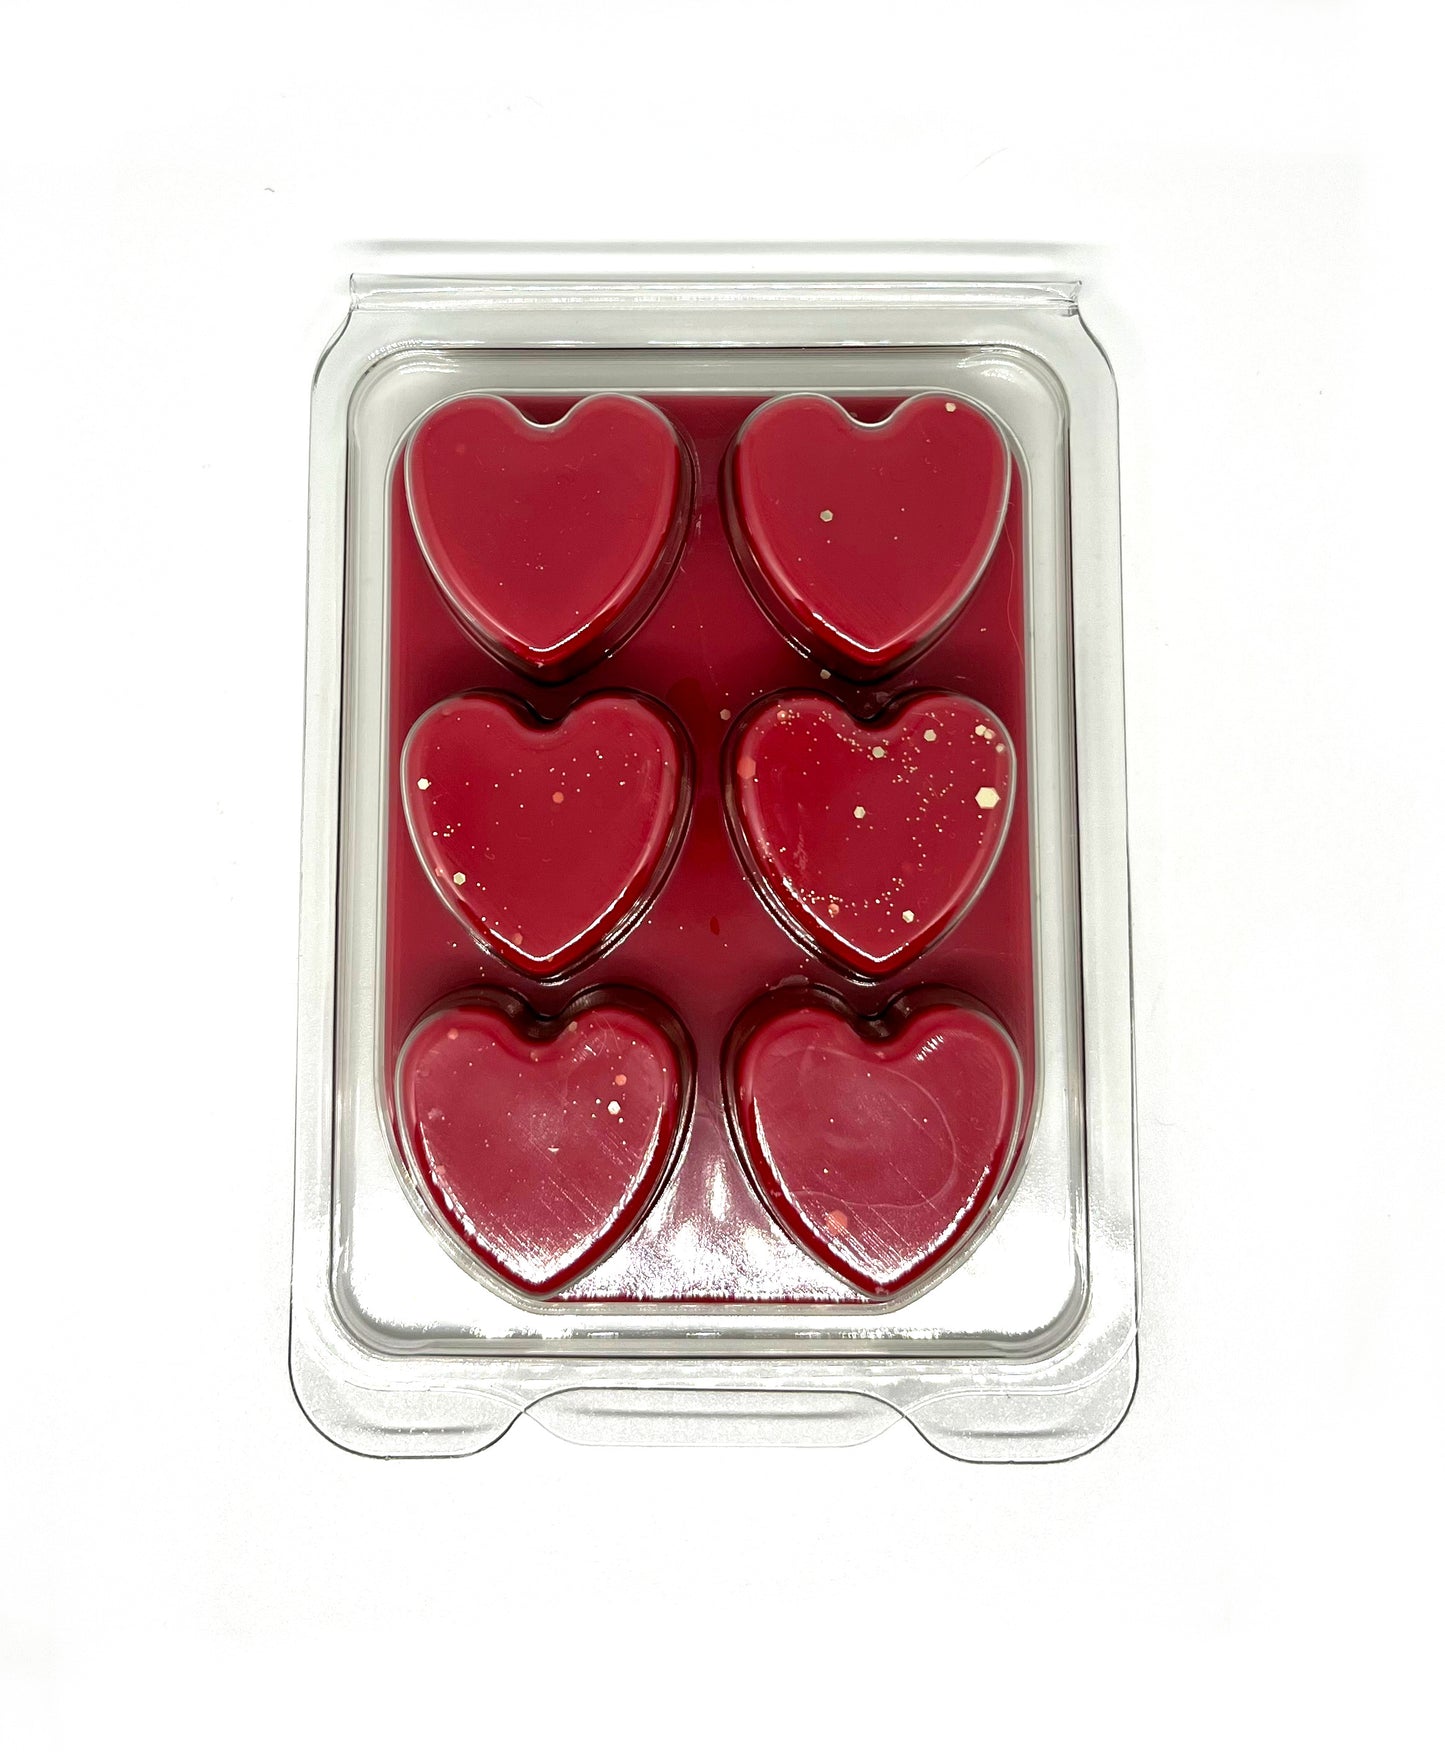 Red Roses Wax Melts Inspired by JM - ScentiMelti  Red Roses Wax Melts Inspired by JM